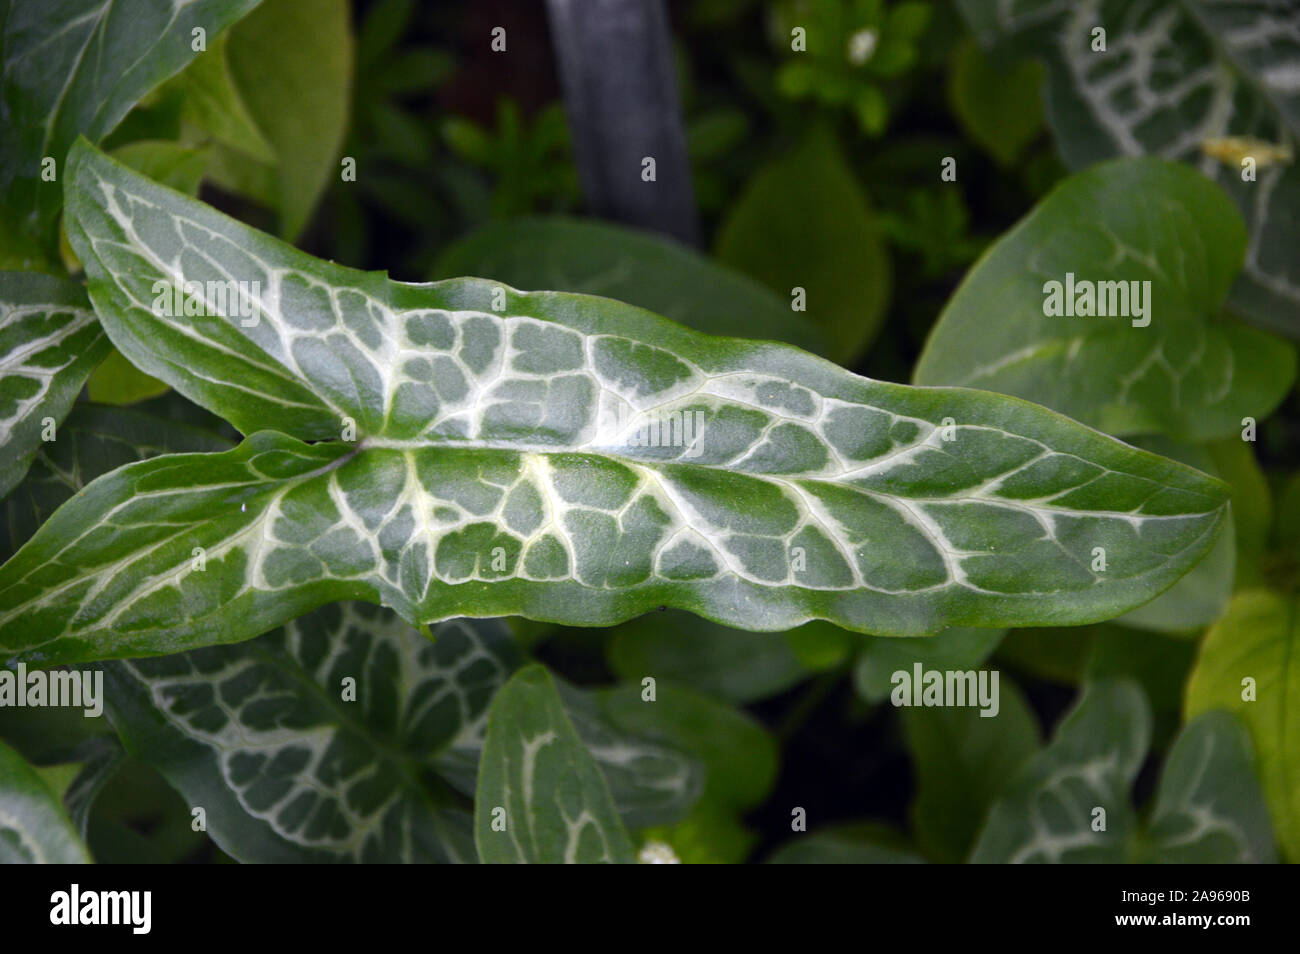 Italian arum 'italicum' lily (Marmoratum/Pictum) veined white Leaves growing in a Border at RHS Garden Harlow Carr, Harrogate, Yorkshire. England. Stock Photo